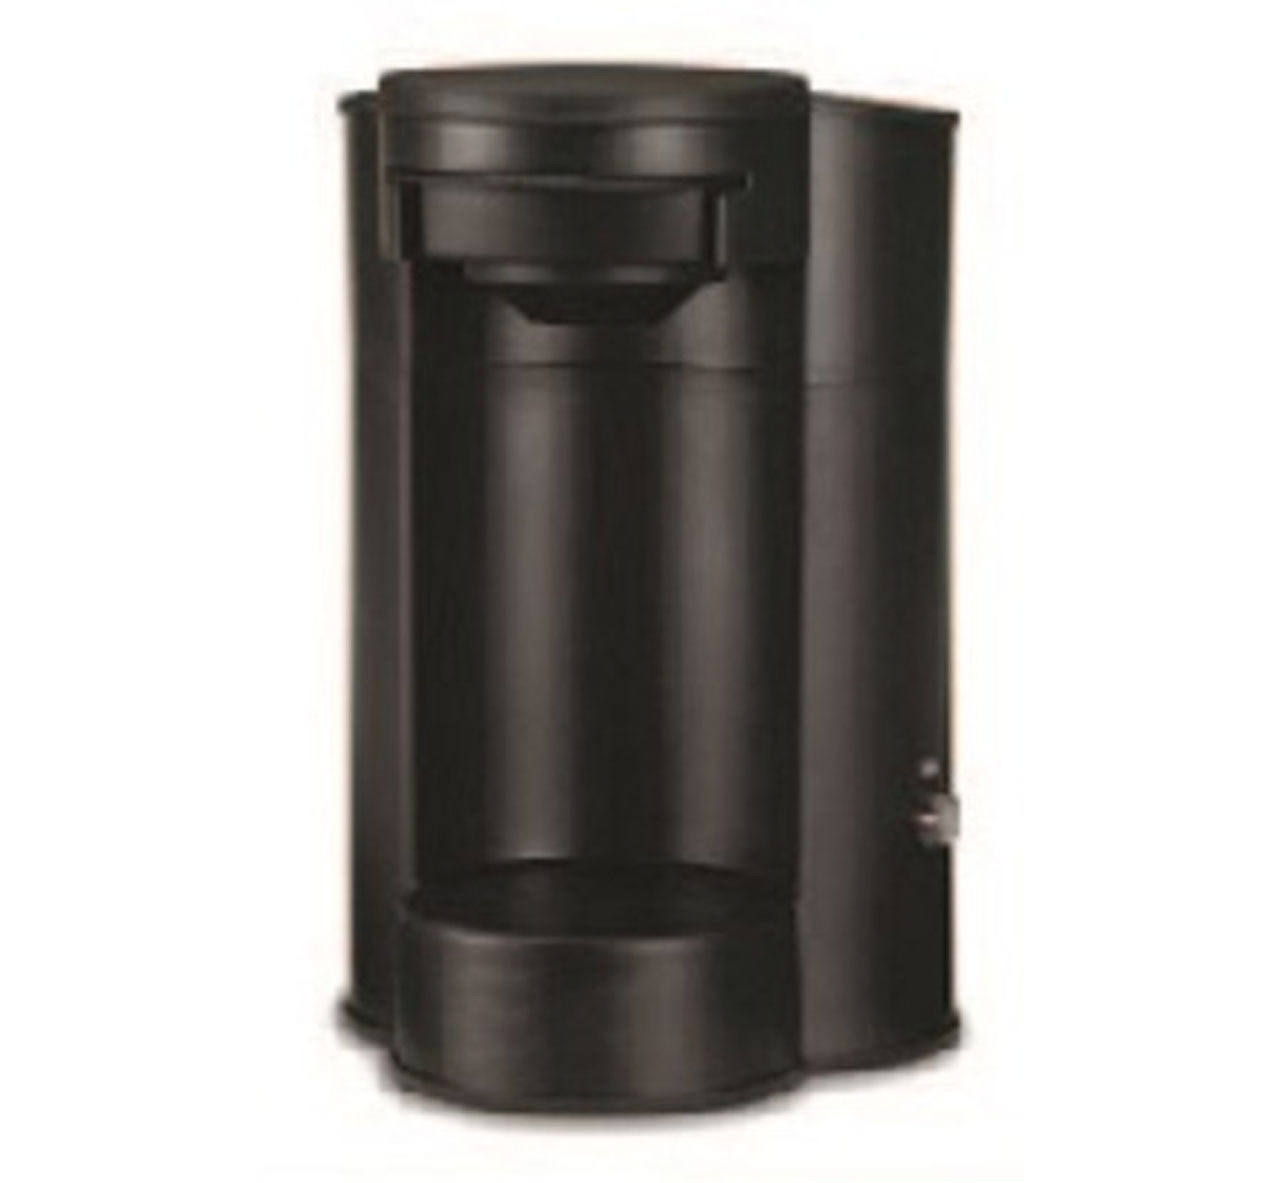 Does each case of the Pavy Coffee Maker include multiple units?